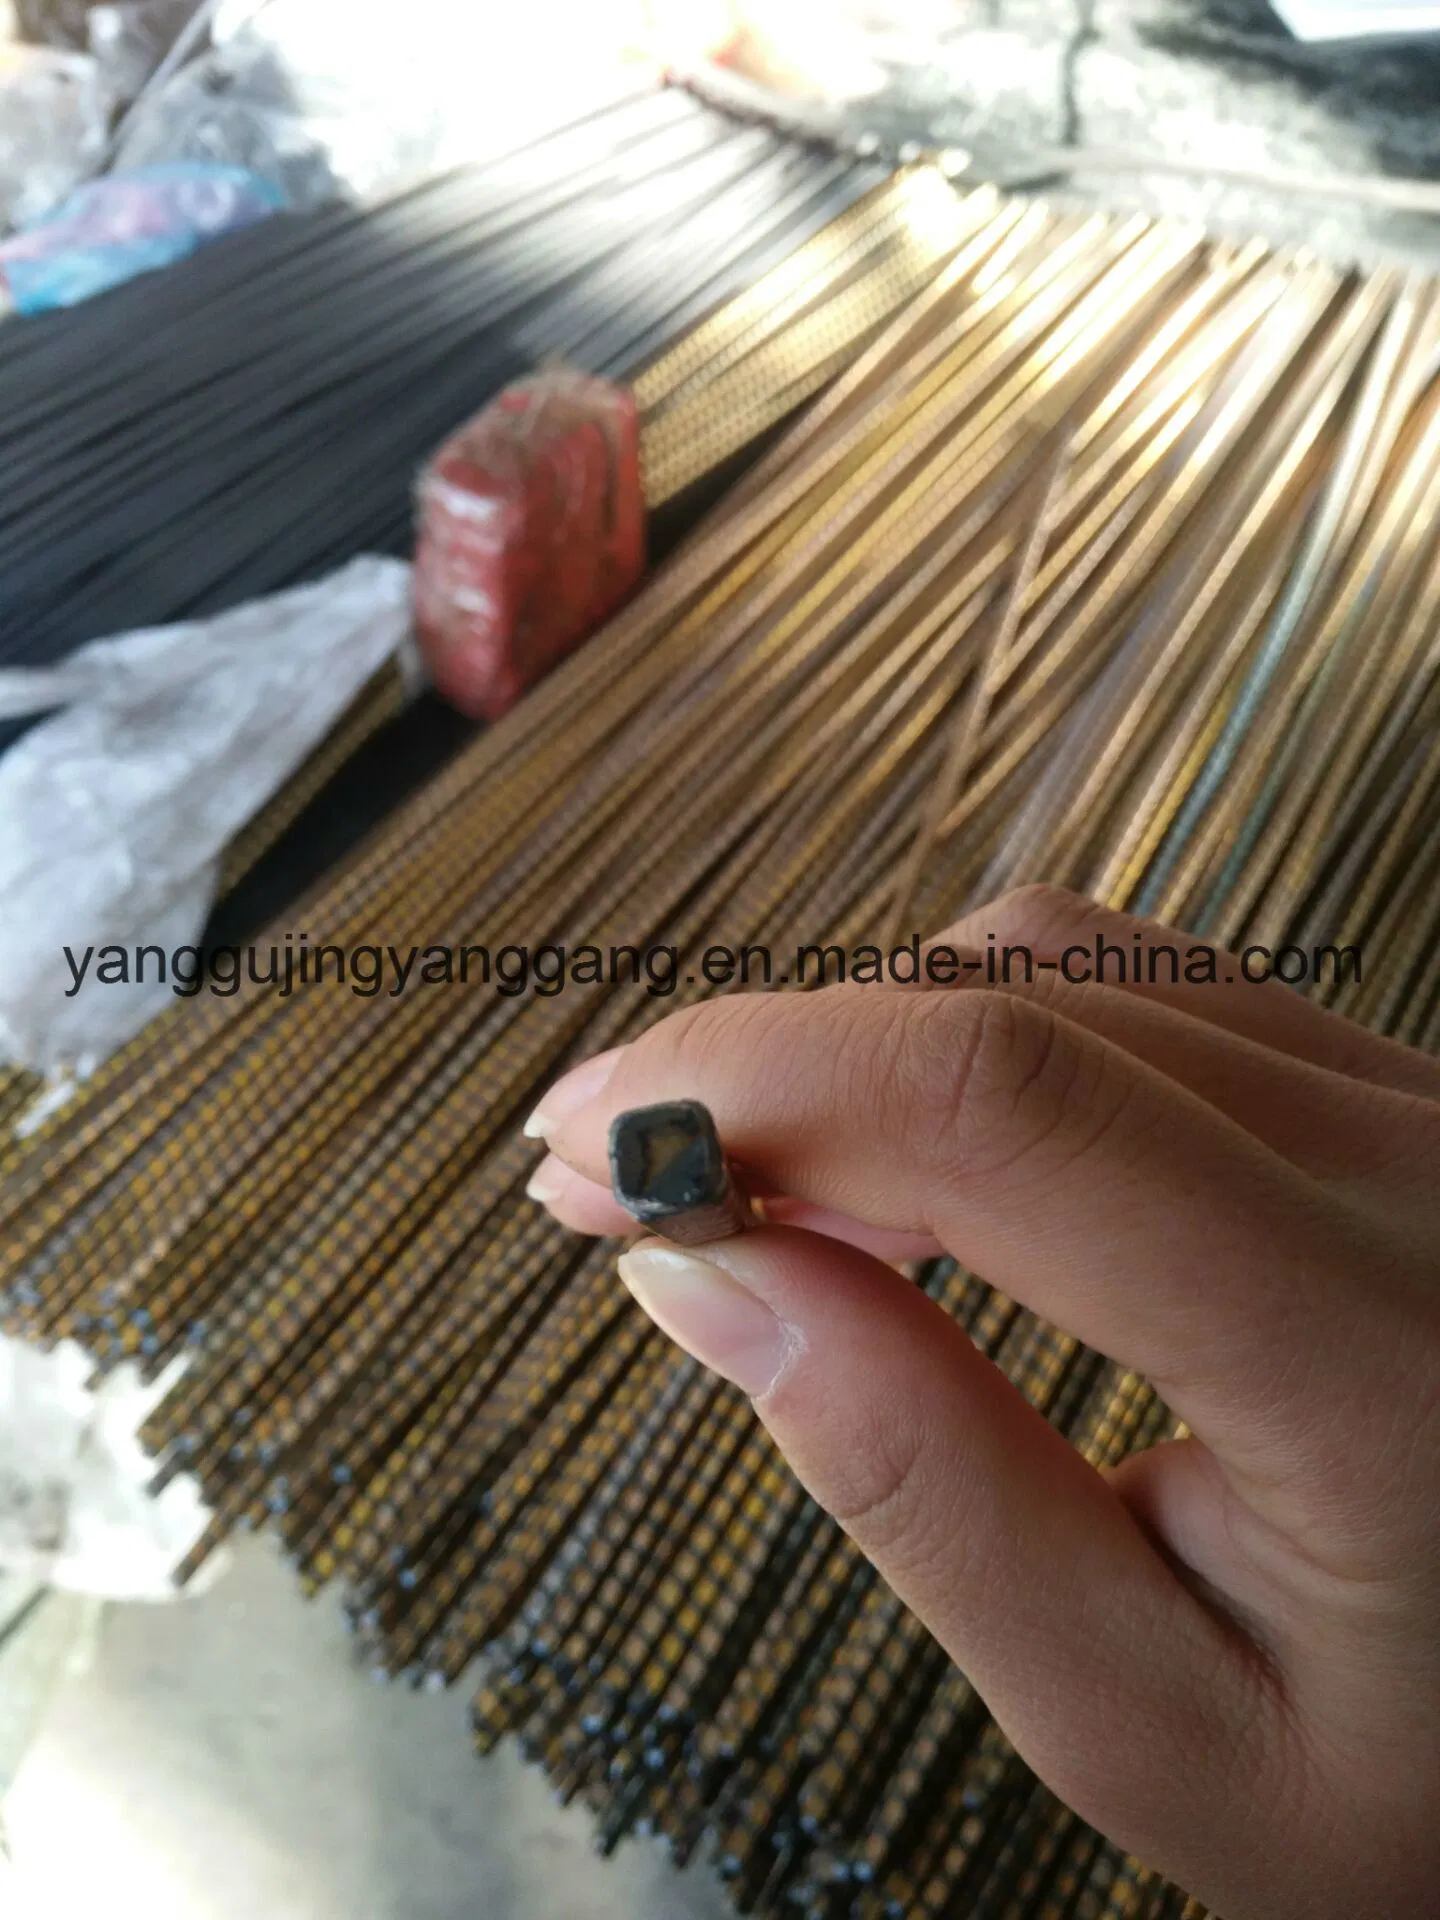 Jig-Flexible Shaft-Stable Quality